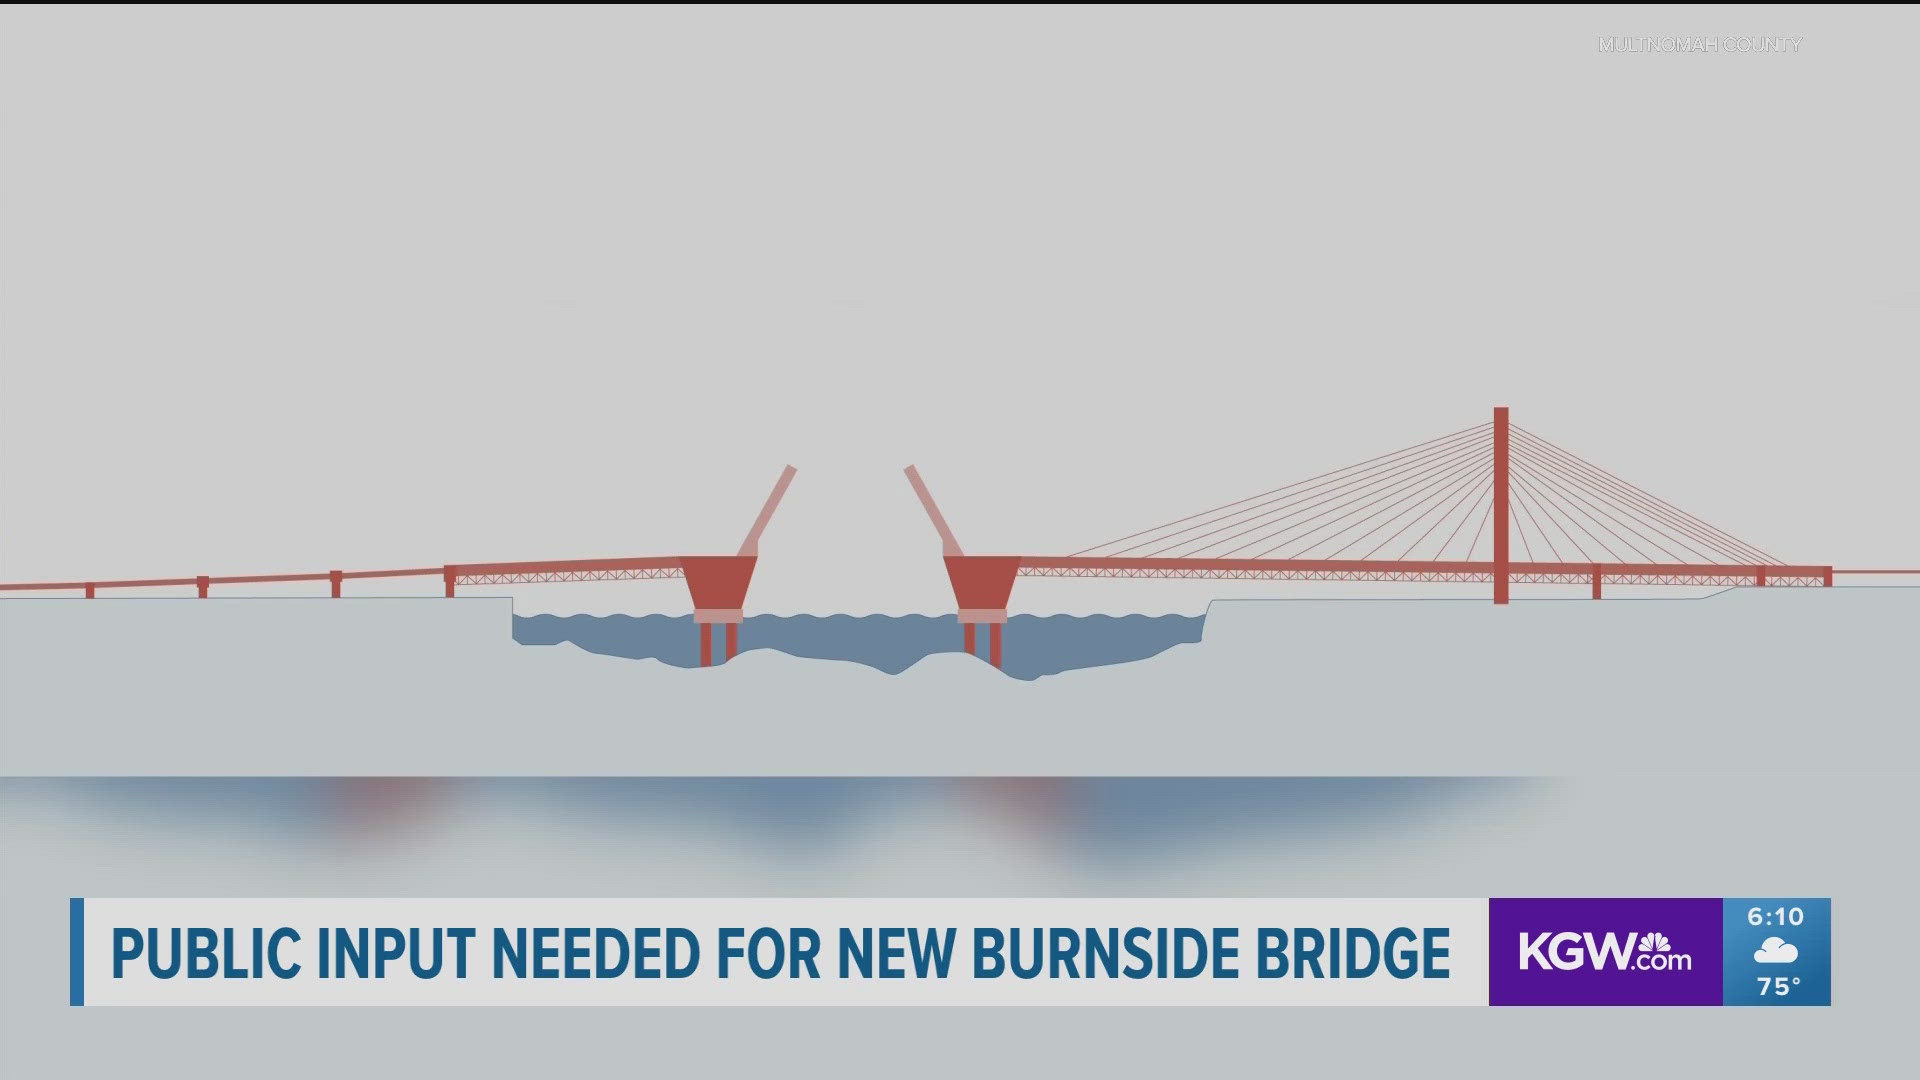 Multnomah County has launched a new online survey to gather public input about the design of the replacement Burnside Bridge.